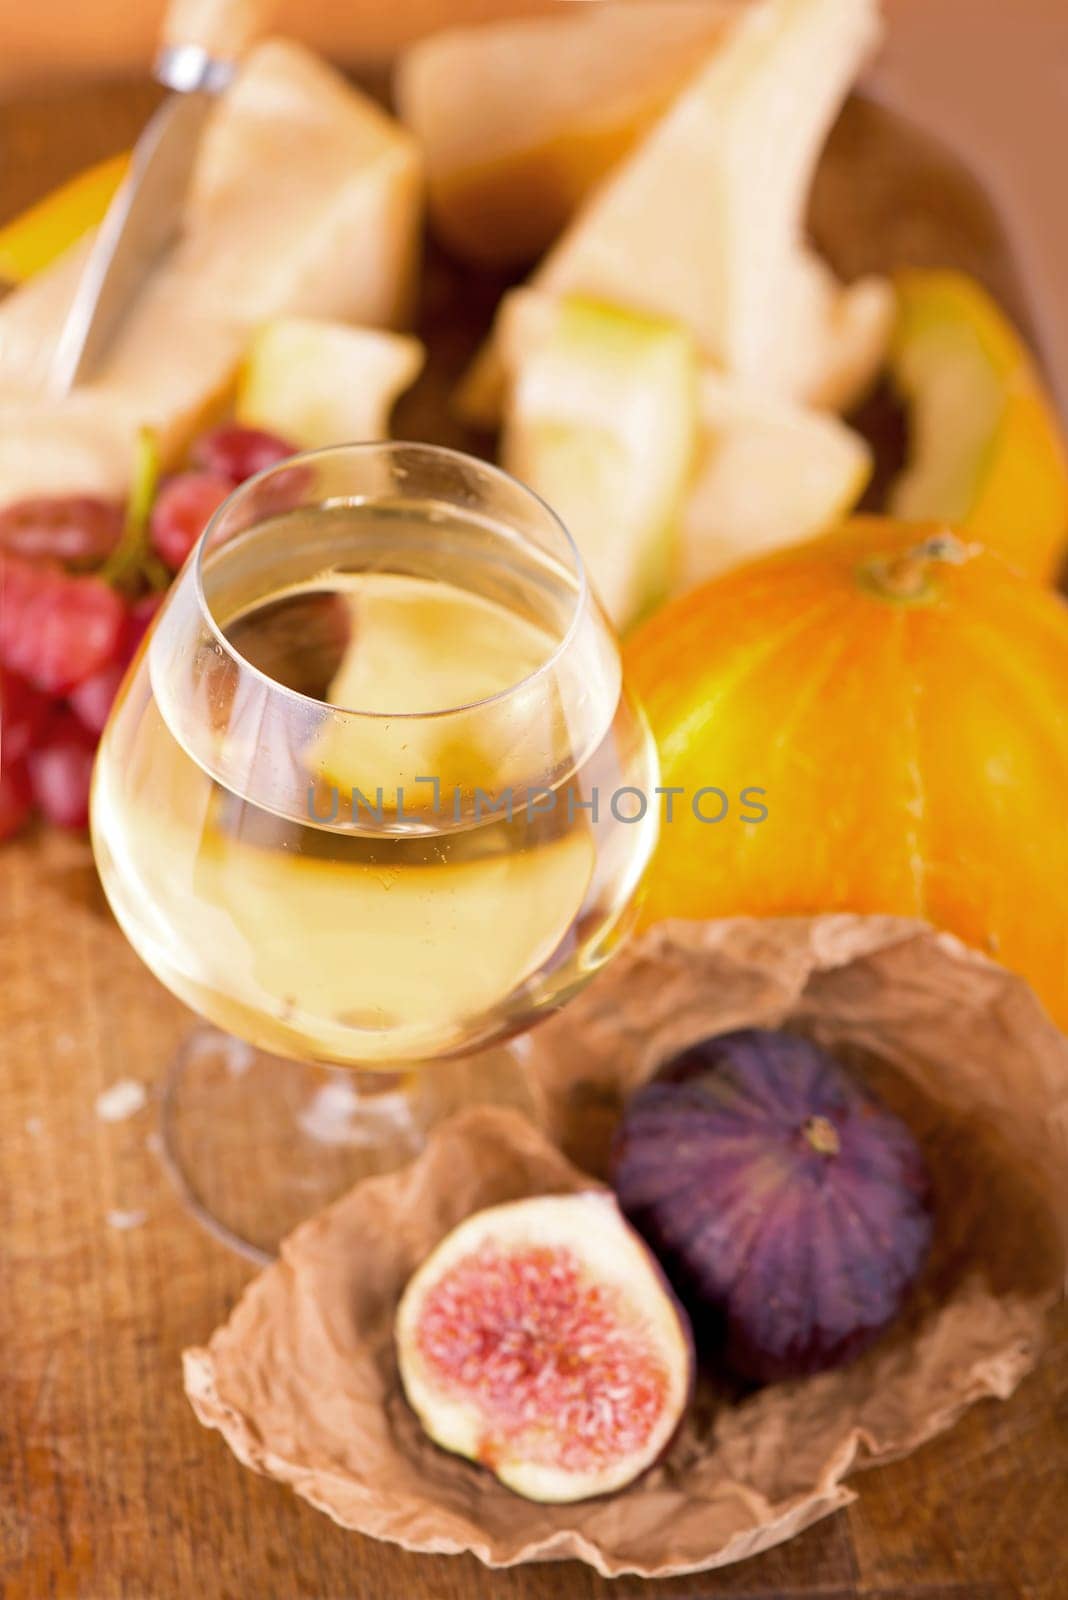 white wine, cheese, melon, grapes figs on a dark background